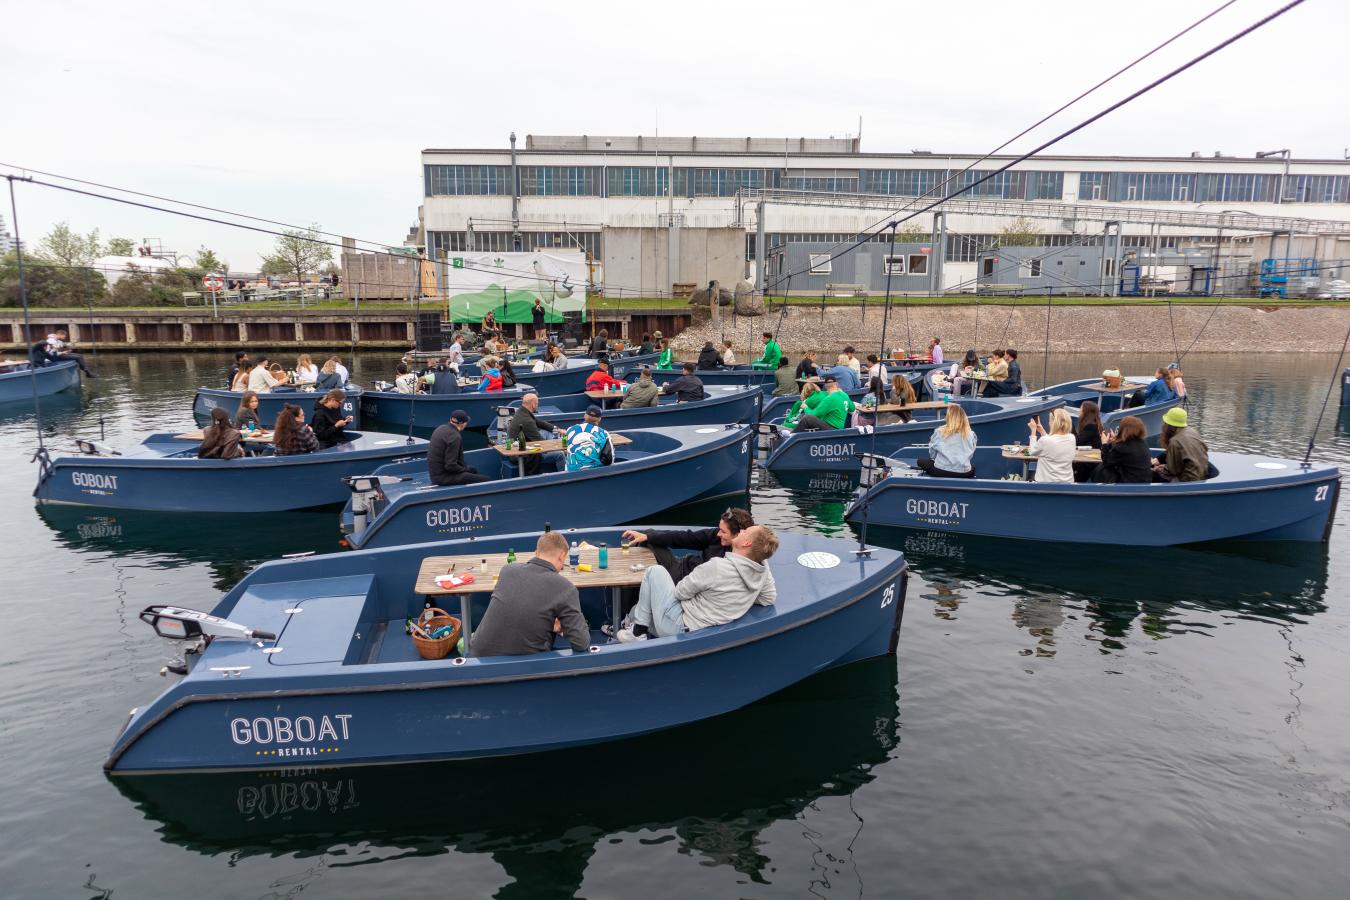 Copenhagen's canals host smart social distancing solution for concerts and  events